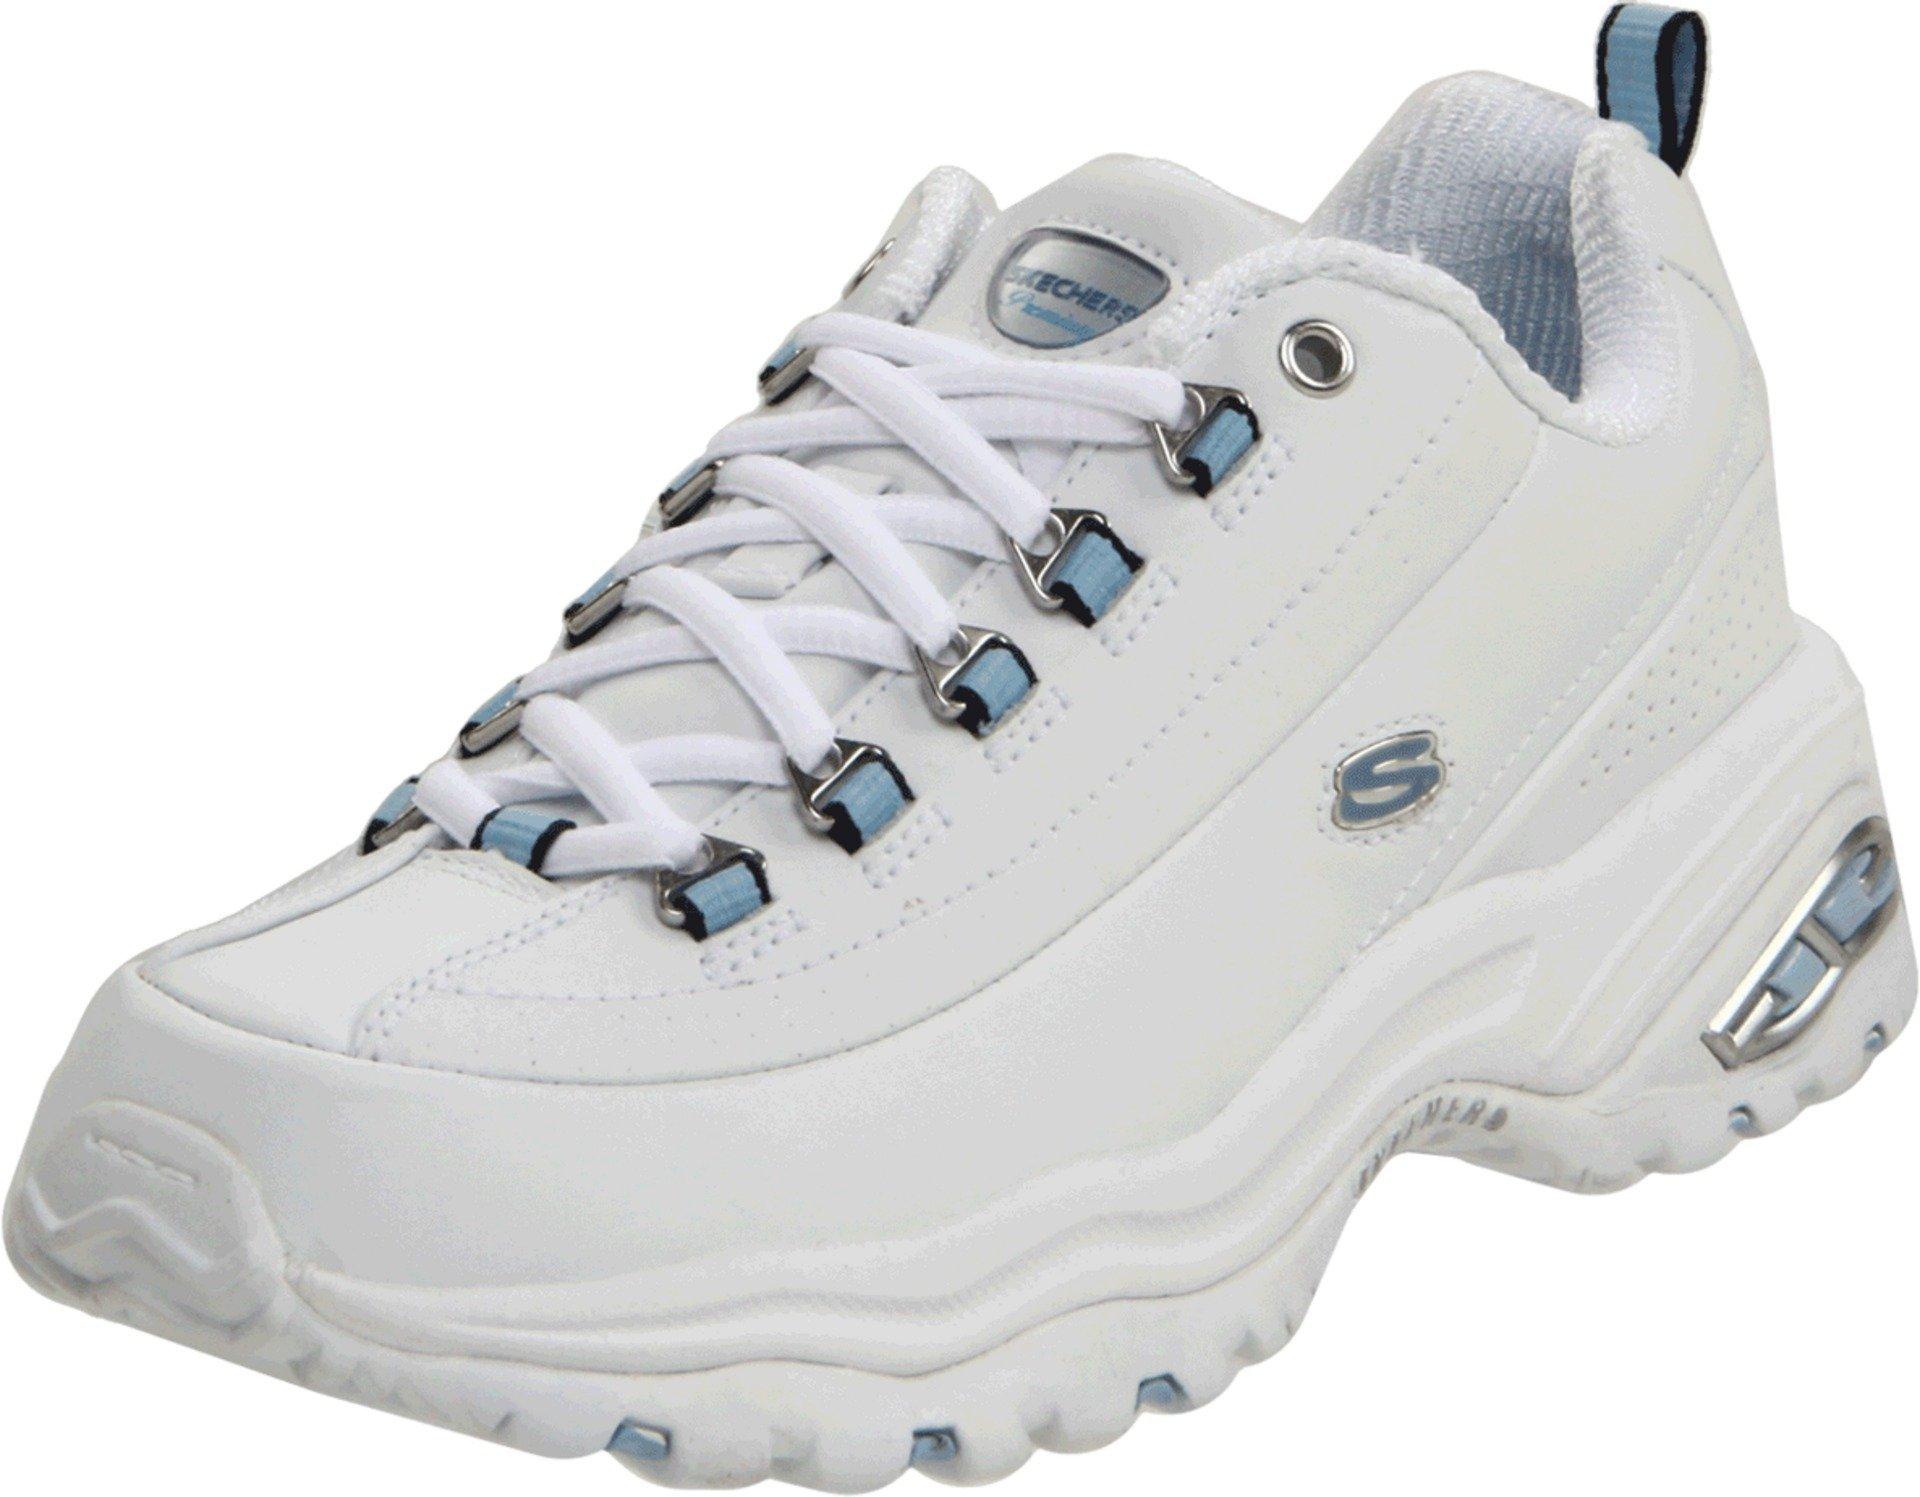 Skechers Premiums White Smooth Leather/blue Trim 8.5 - Save 51% | Lyst